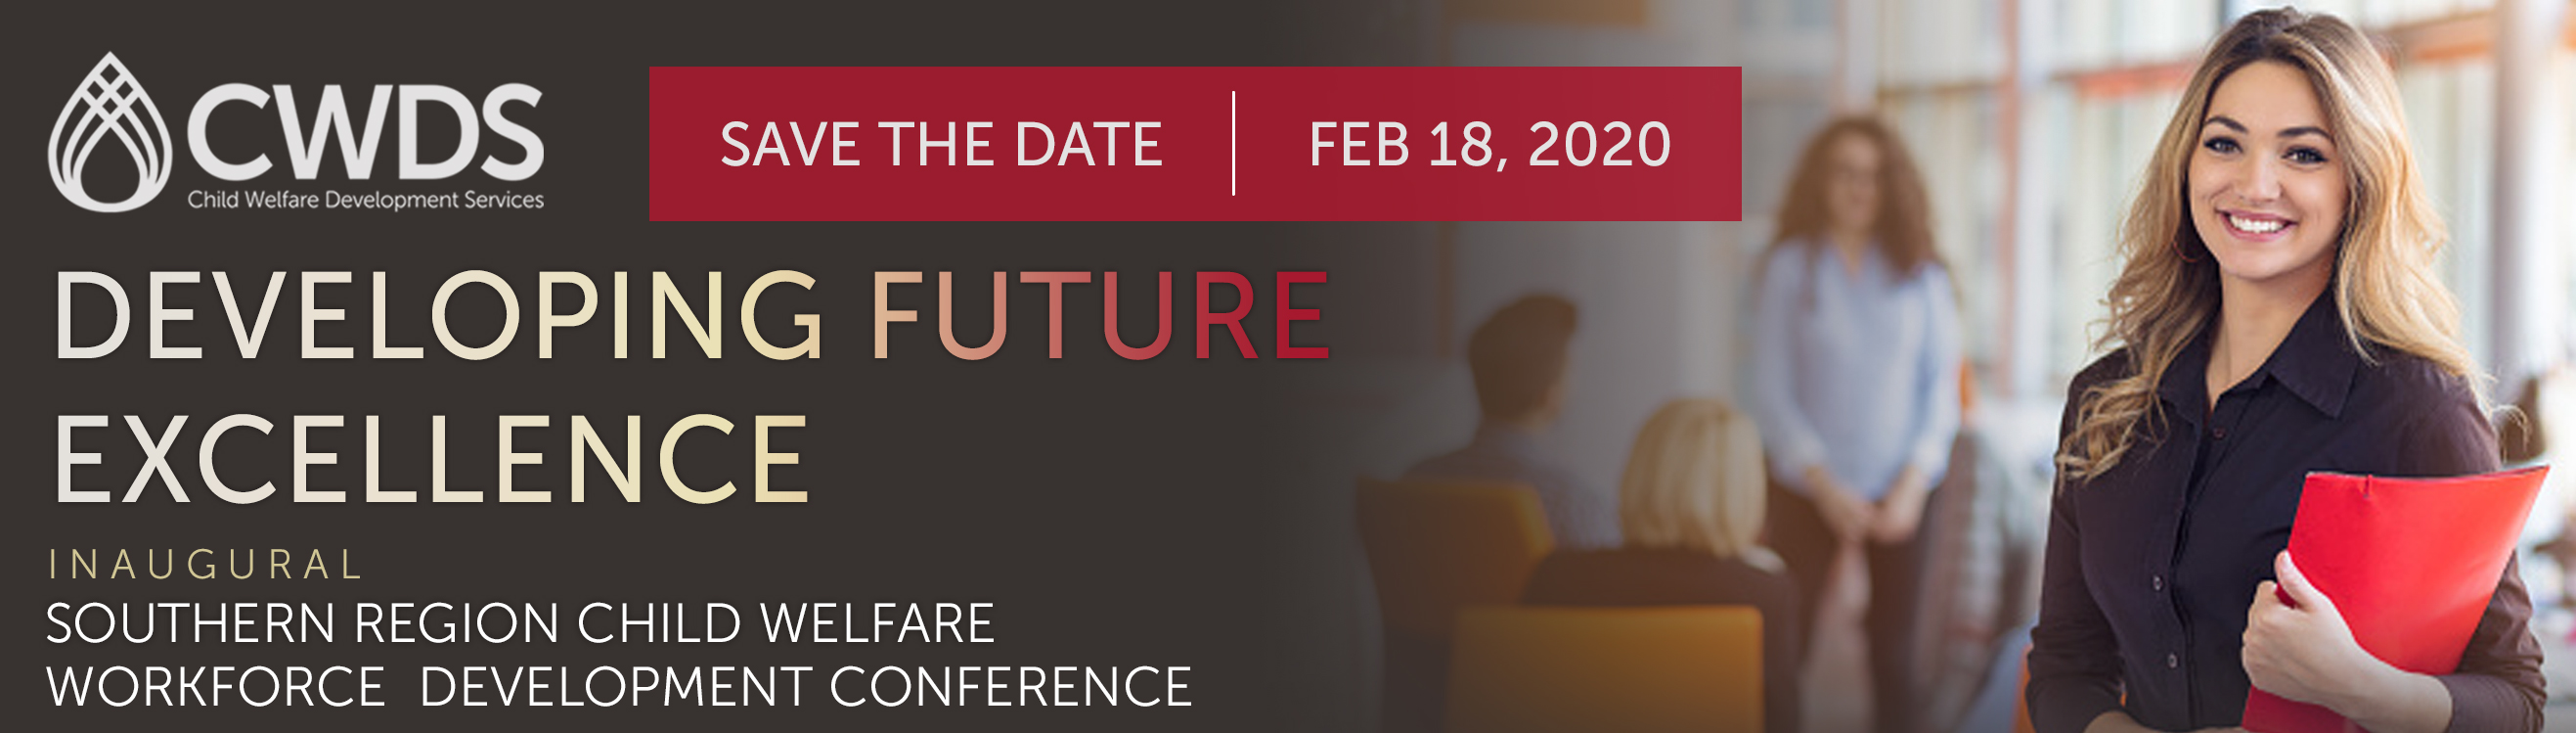 Developing Future Excellence Conference February 18, 2020